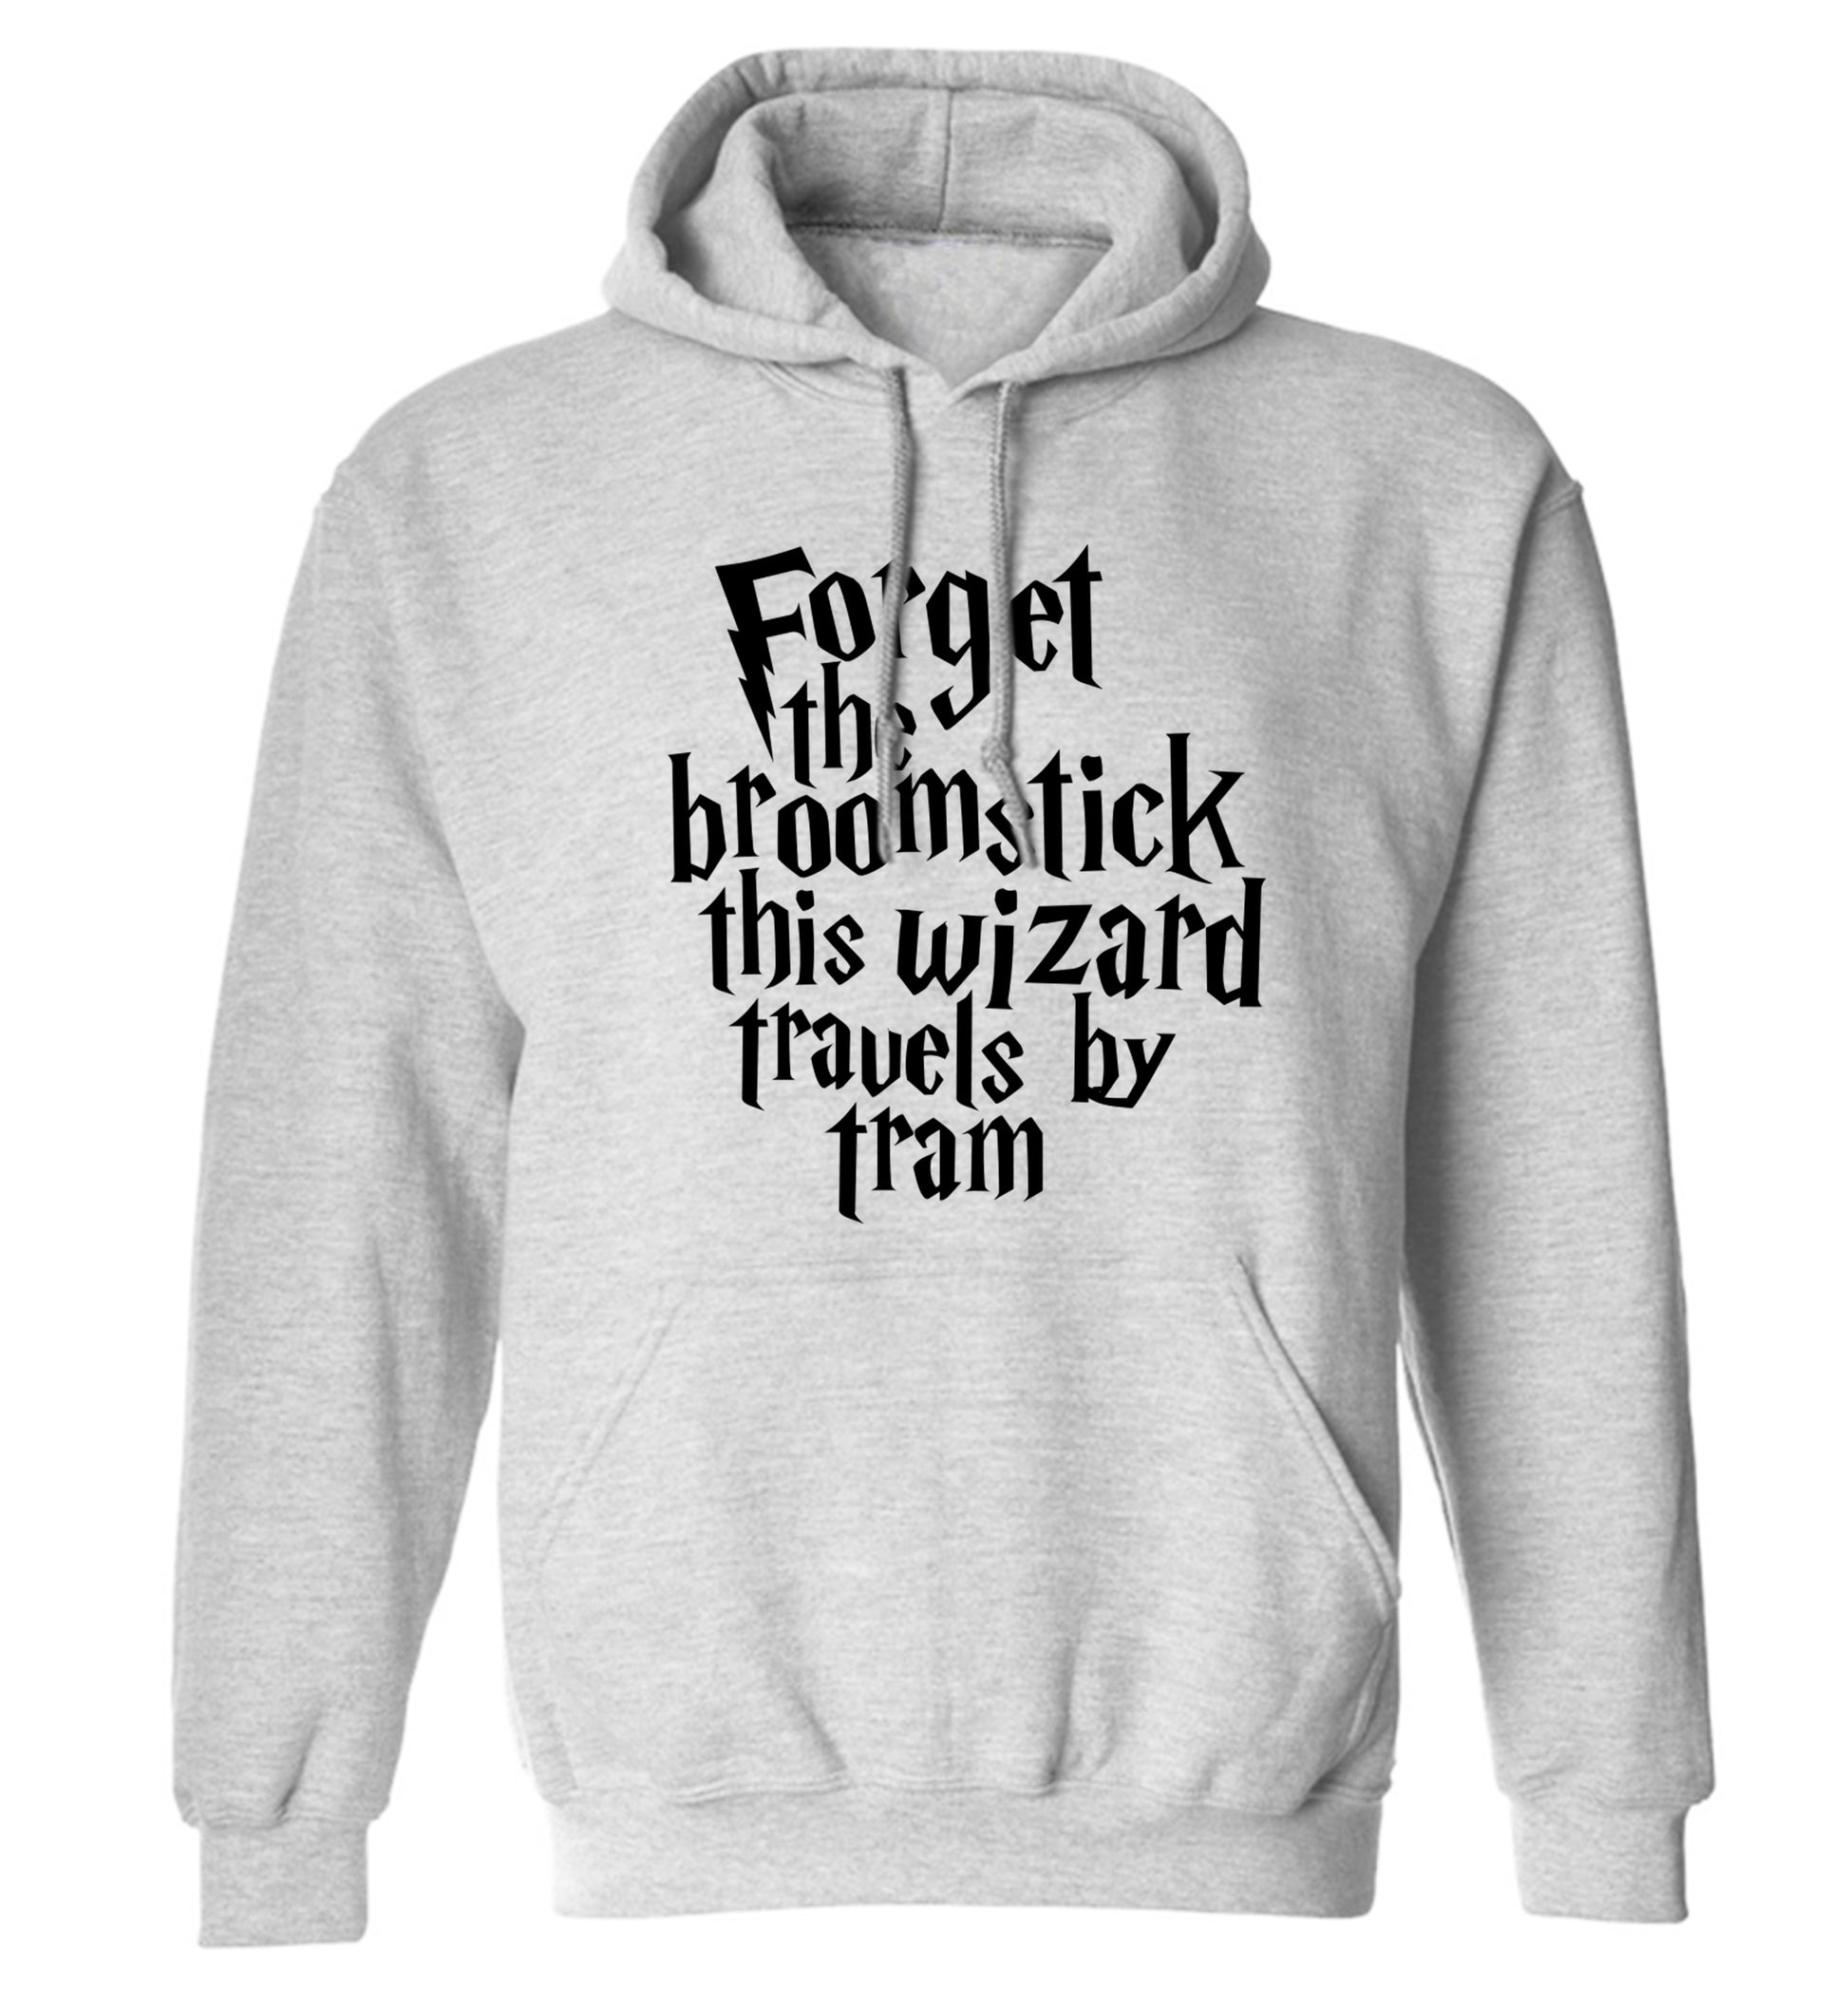 Forget the broomstick this wizard travels by tram adults unisexgrey hoodie 2XL